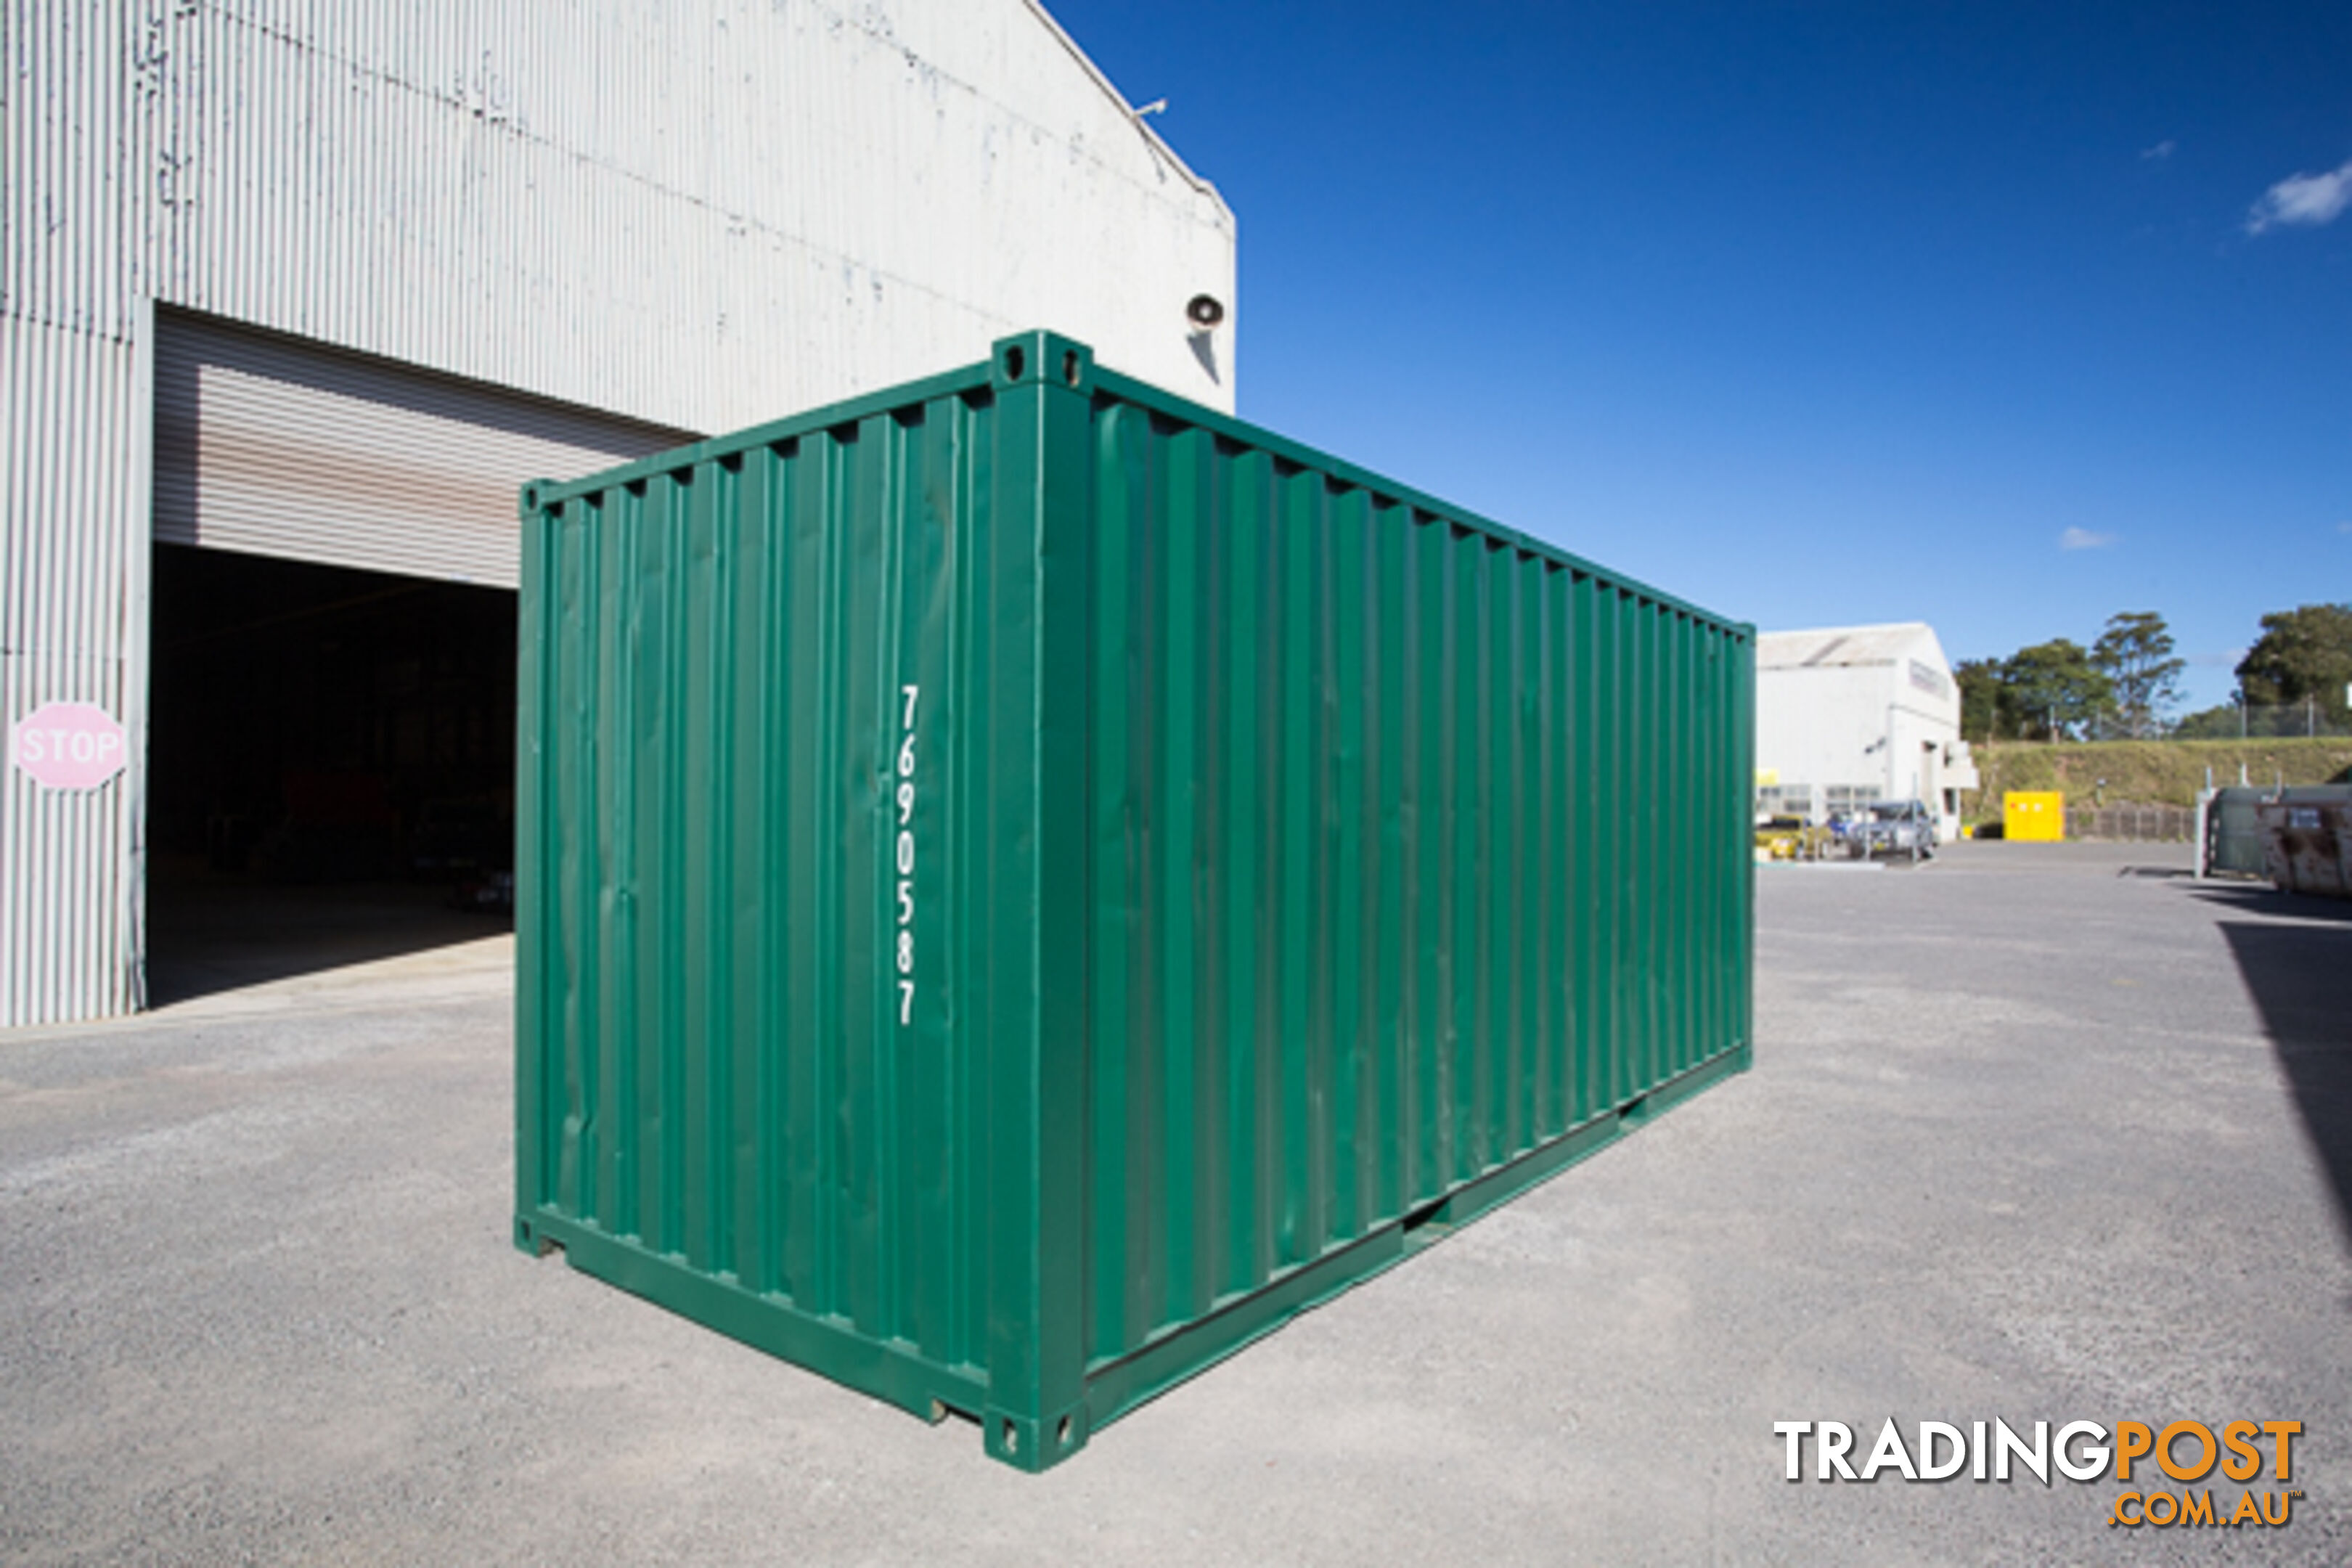 Refurbished Painted 20ft Shipping Containers Goolwa - From $4500 + GST